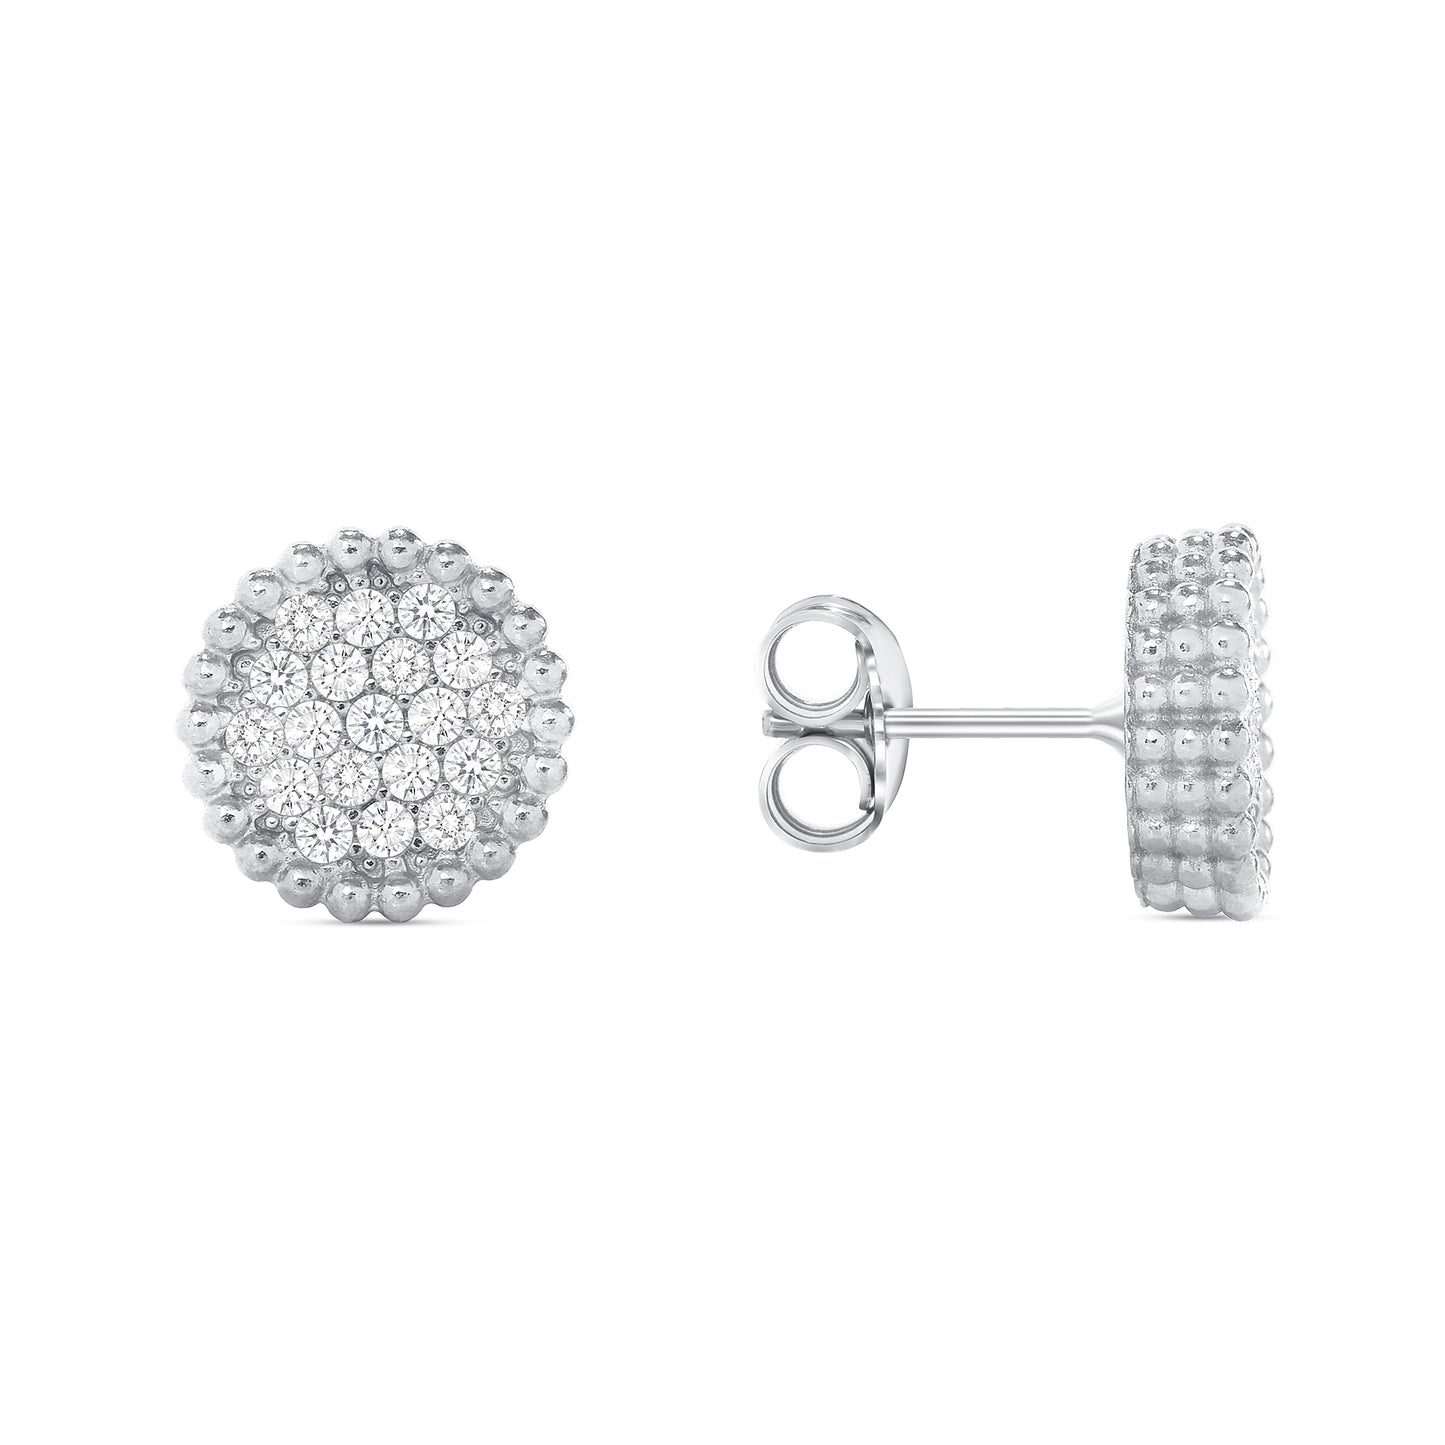 Silver 925 Rhodium Plated Micro Pave Full Cubic Zirconia Circle Earring. ITE9-R